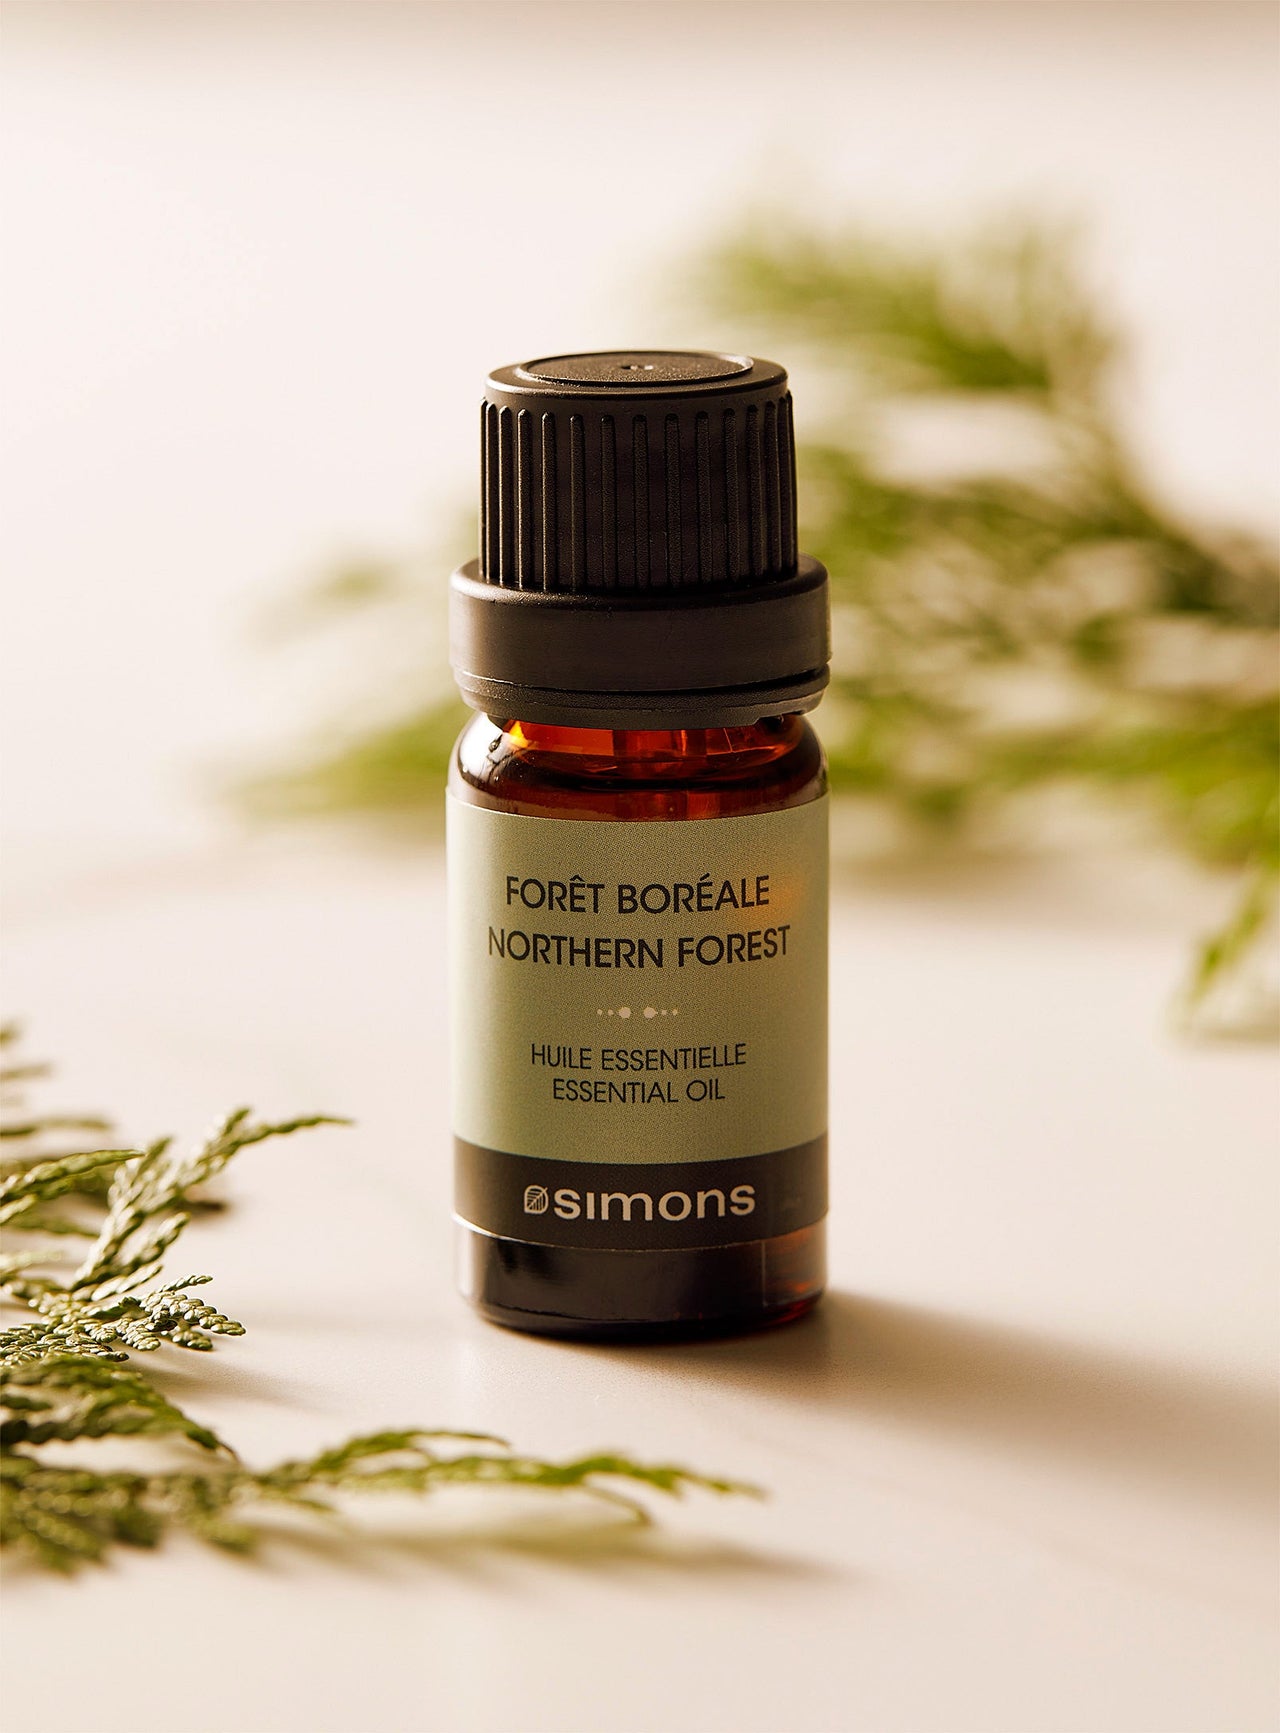 Northern forest diffuser oil